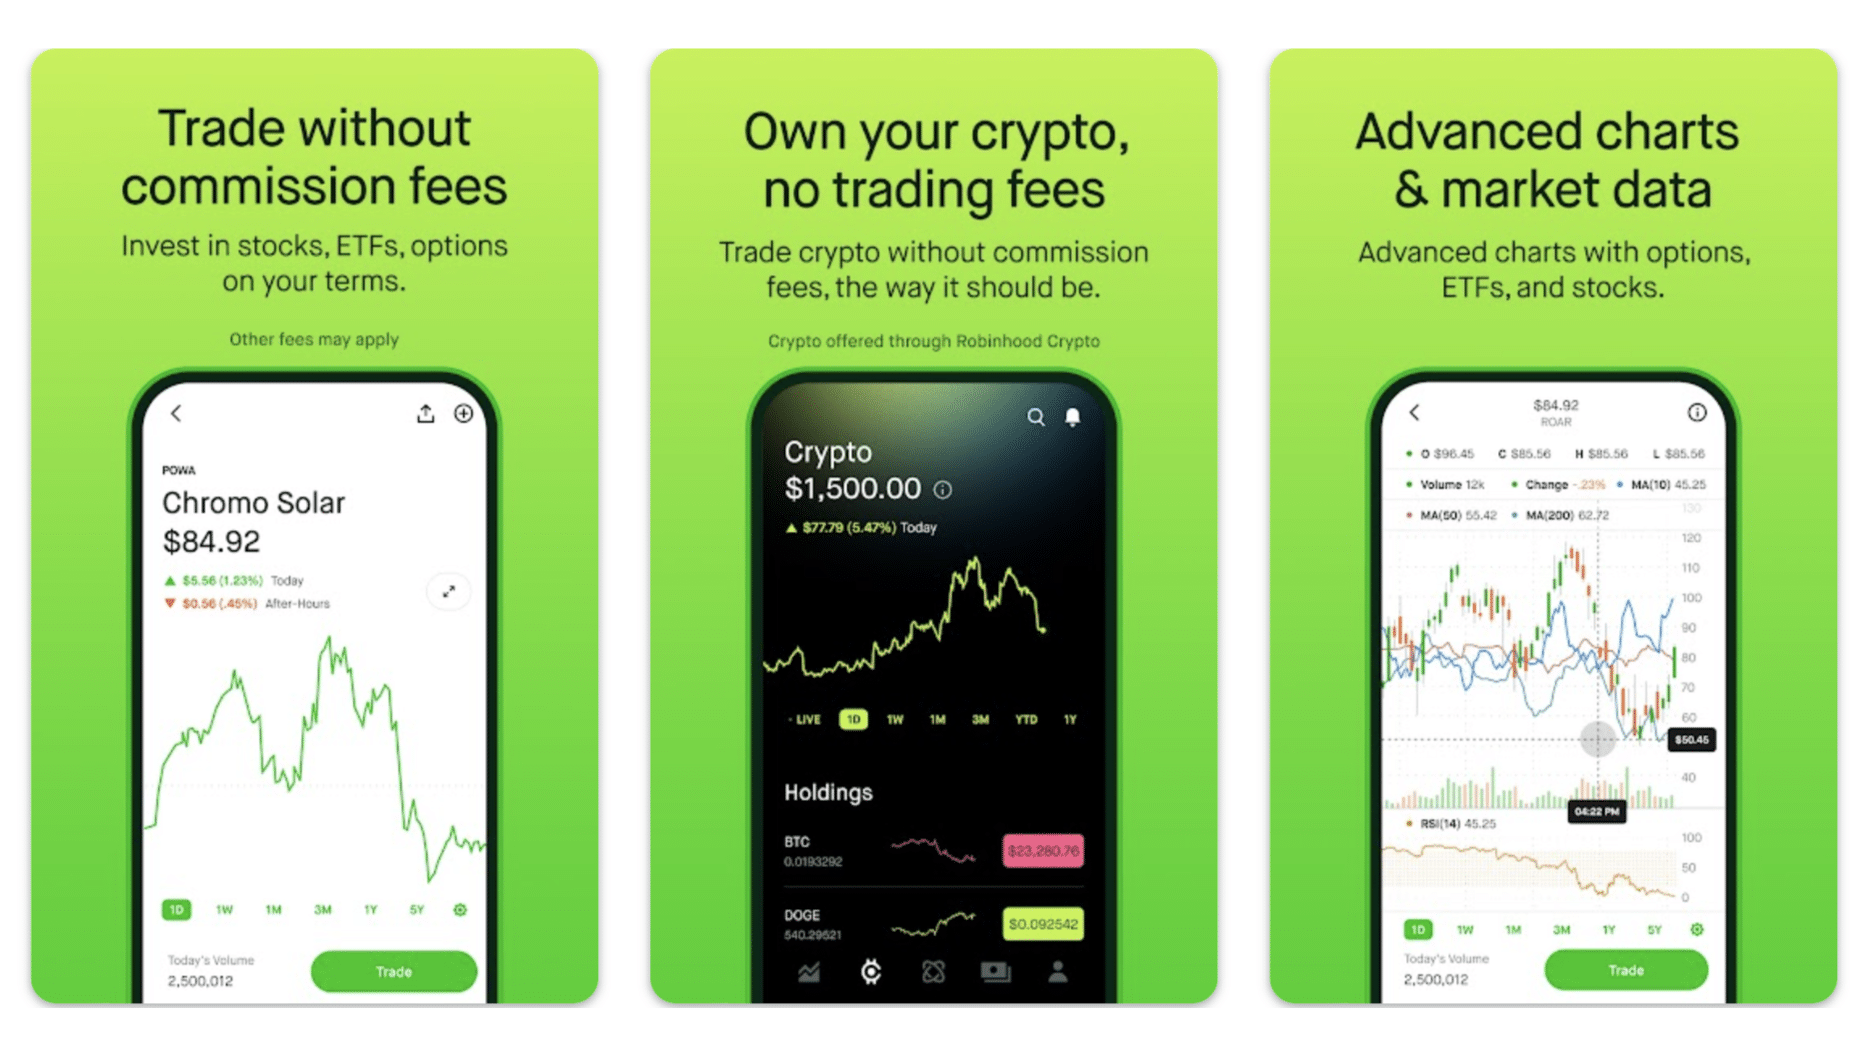 Robinhood mobile crypto and stock trading app interface